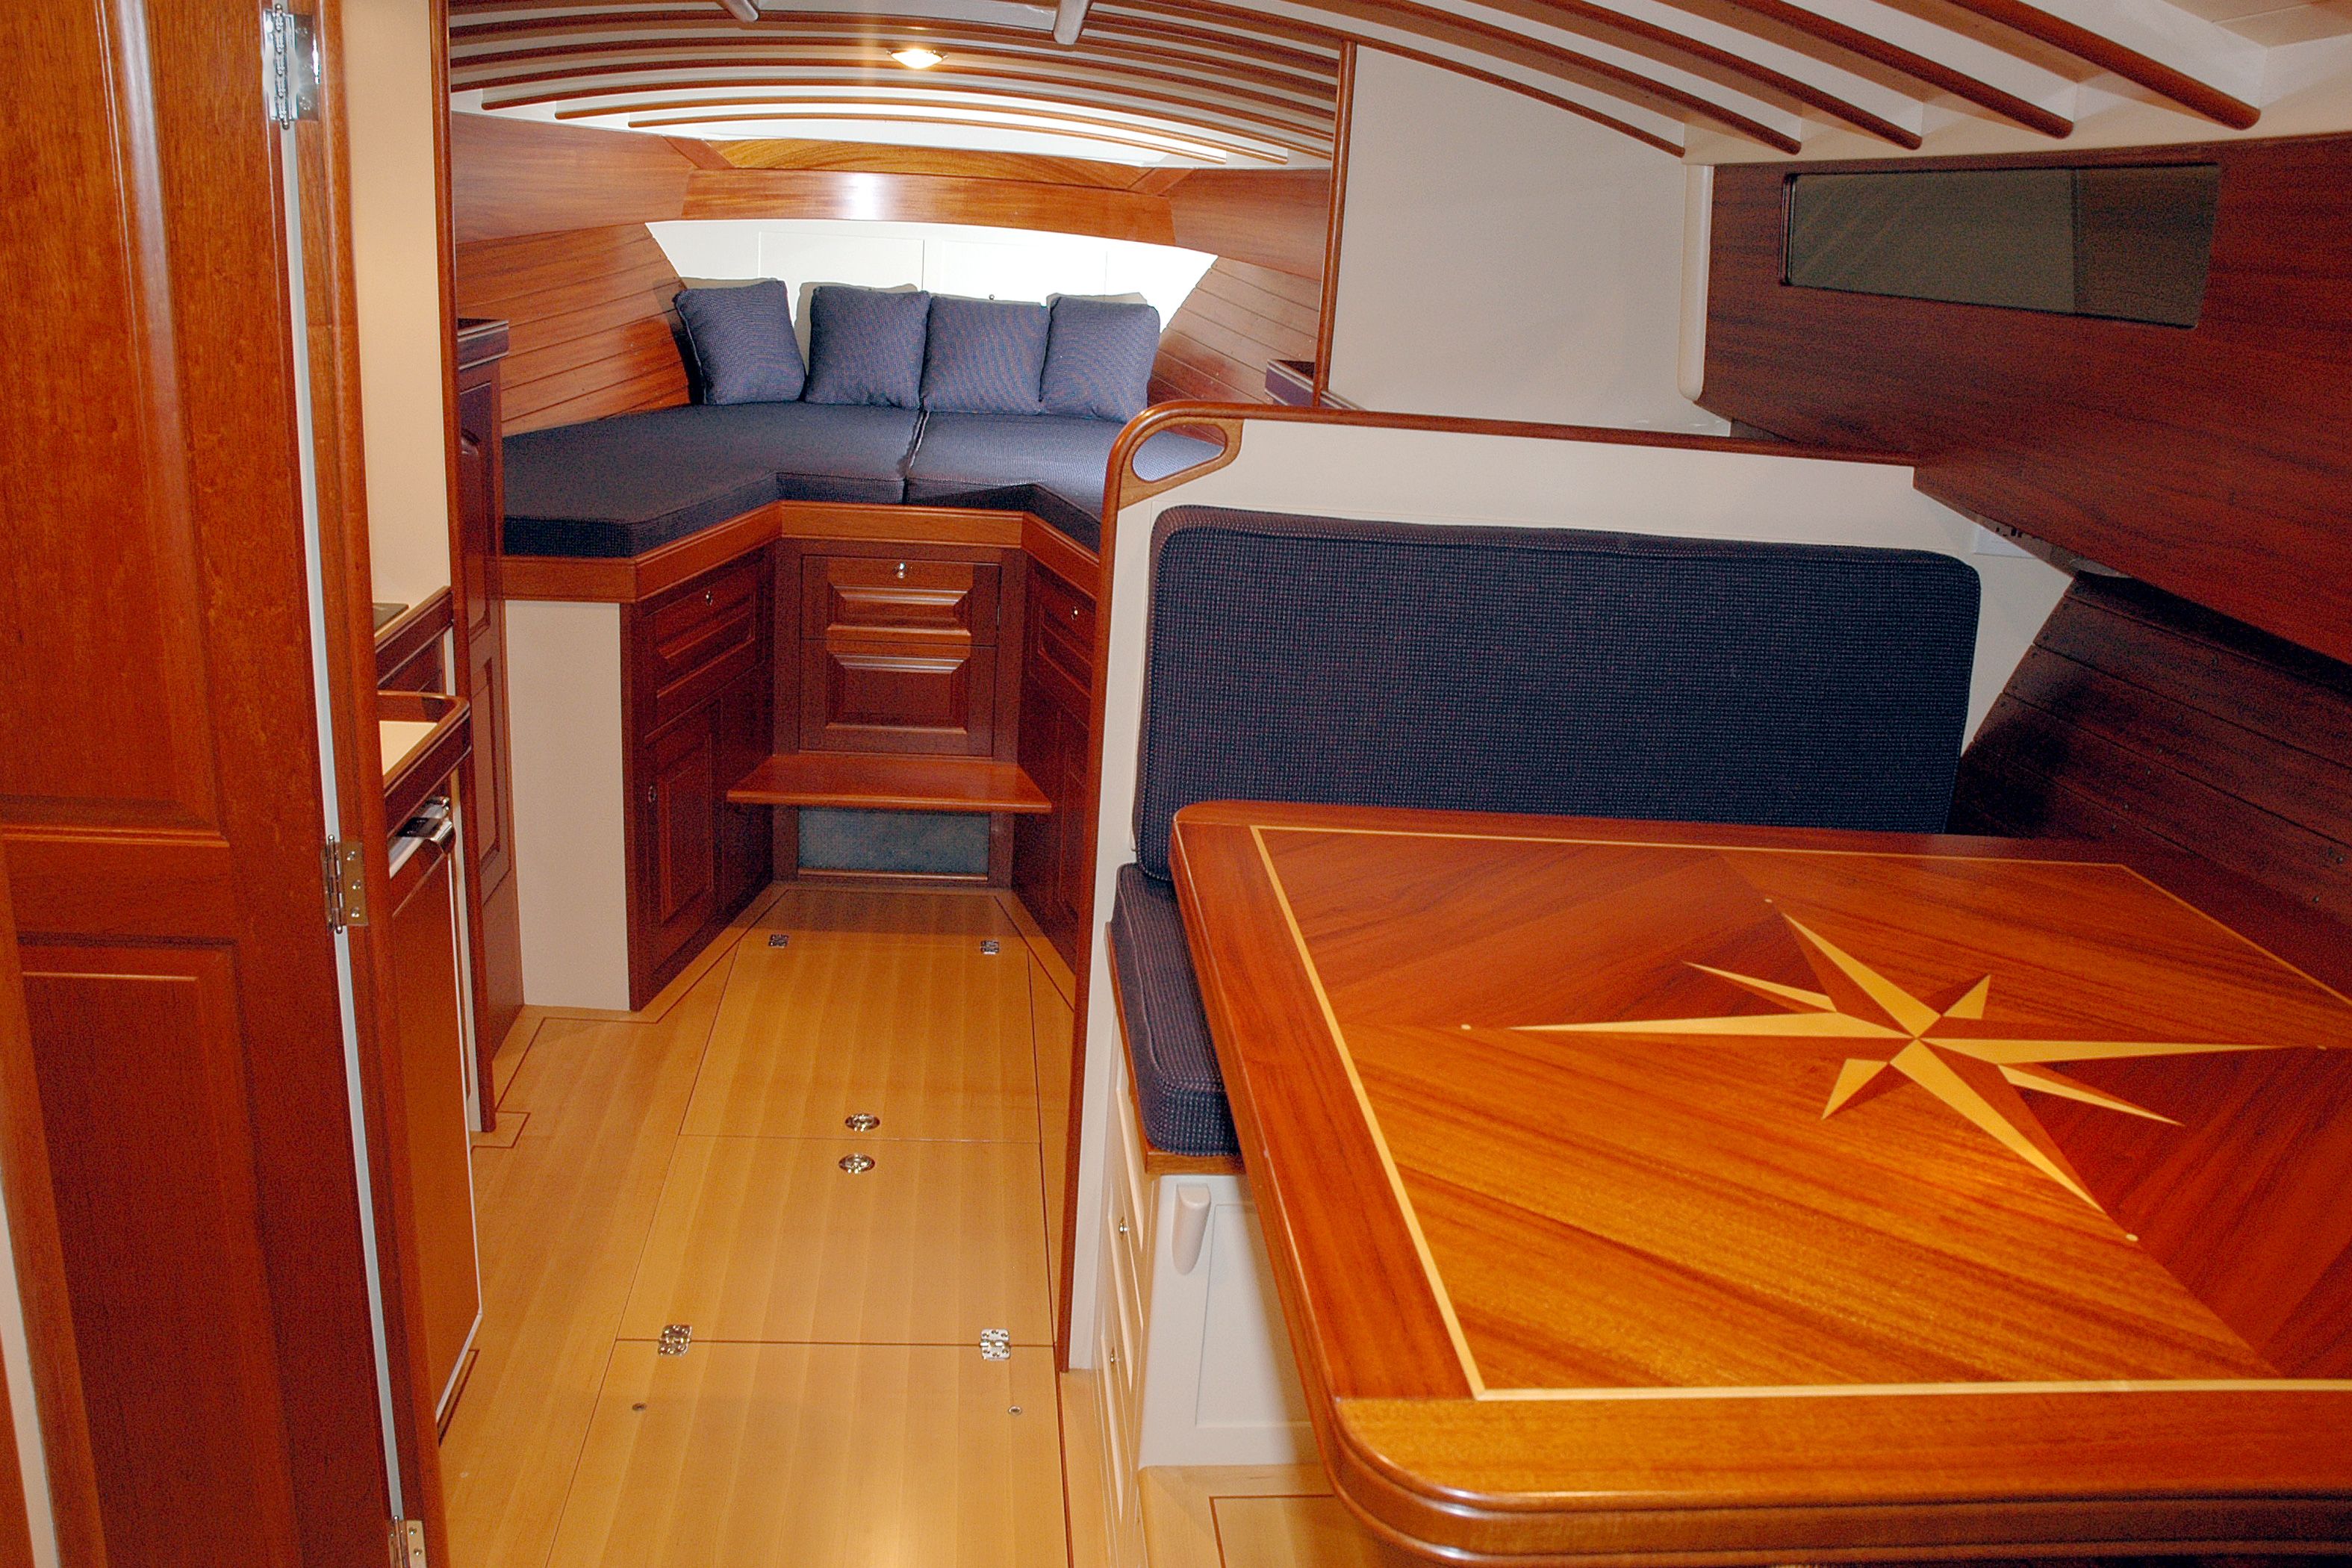 specs blue star classic wooden boat